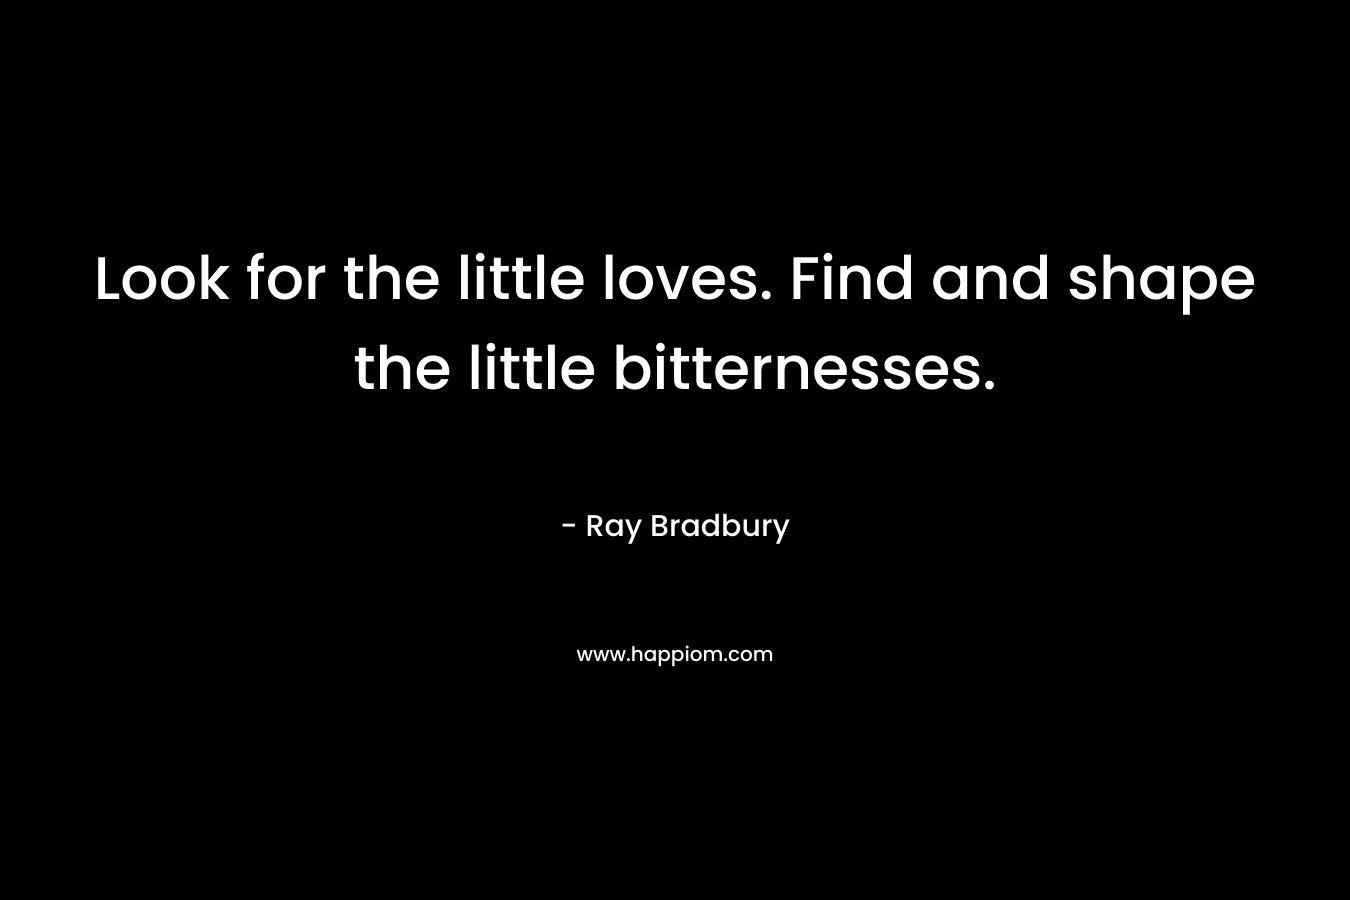 Look for the little loves. Find and shape the little bitternesses. – Ray Bradbury